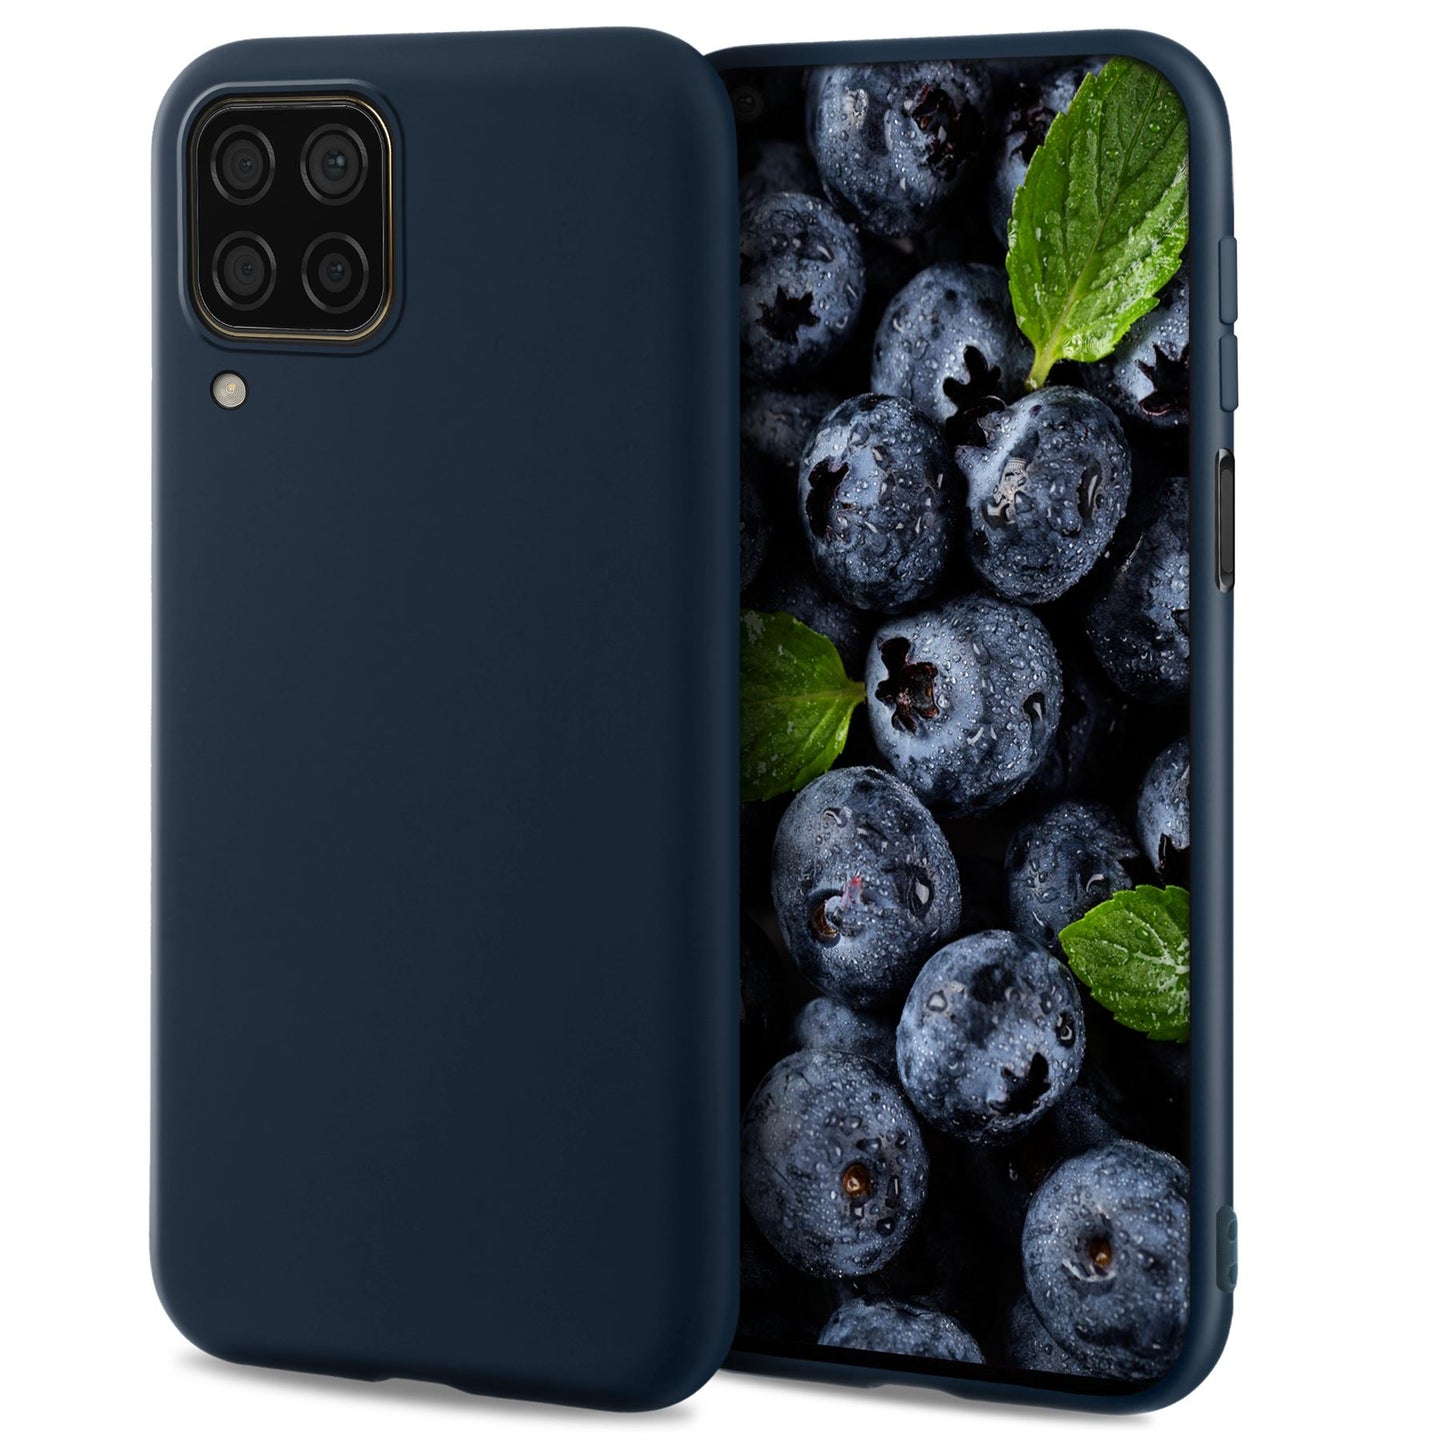 Moozy Lifestyle. Designed for Huawei P40 Lite Case, Midnight Blue - Liquid Silicone Cover with Matte Finish and Soft Microfiber Lining